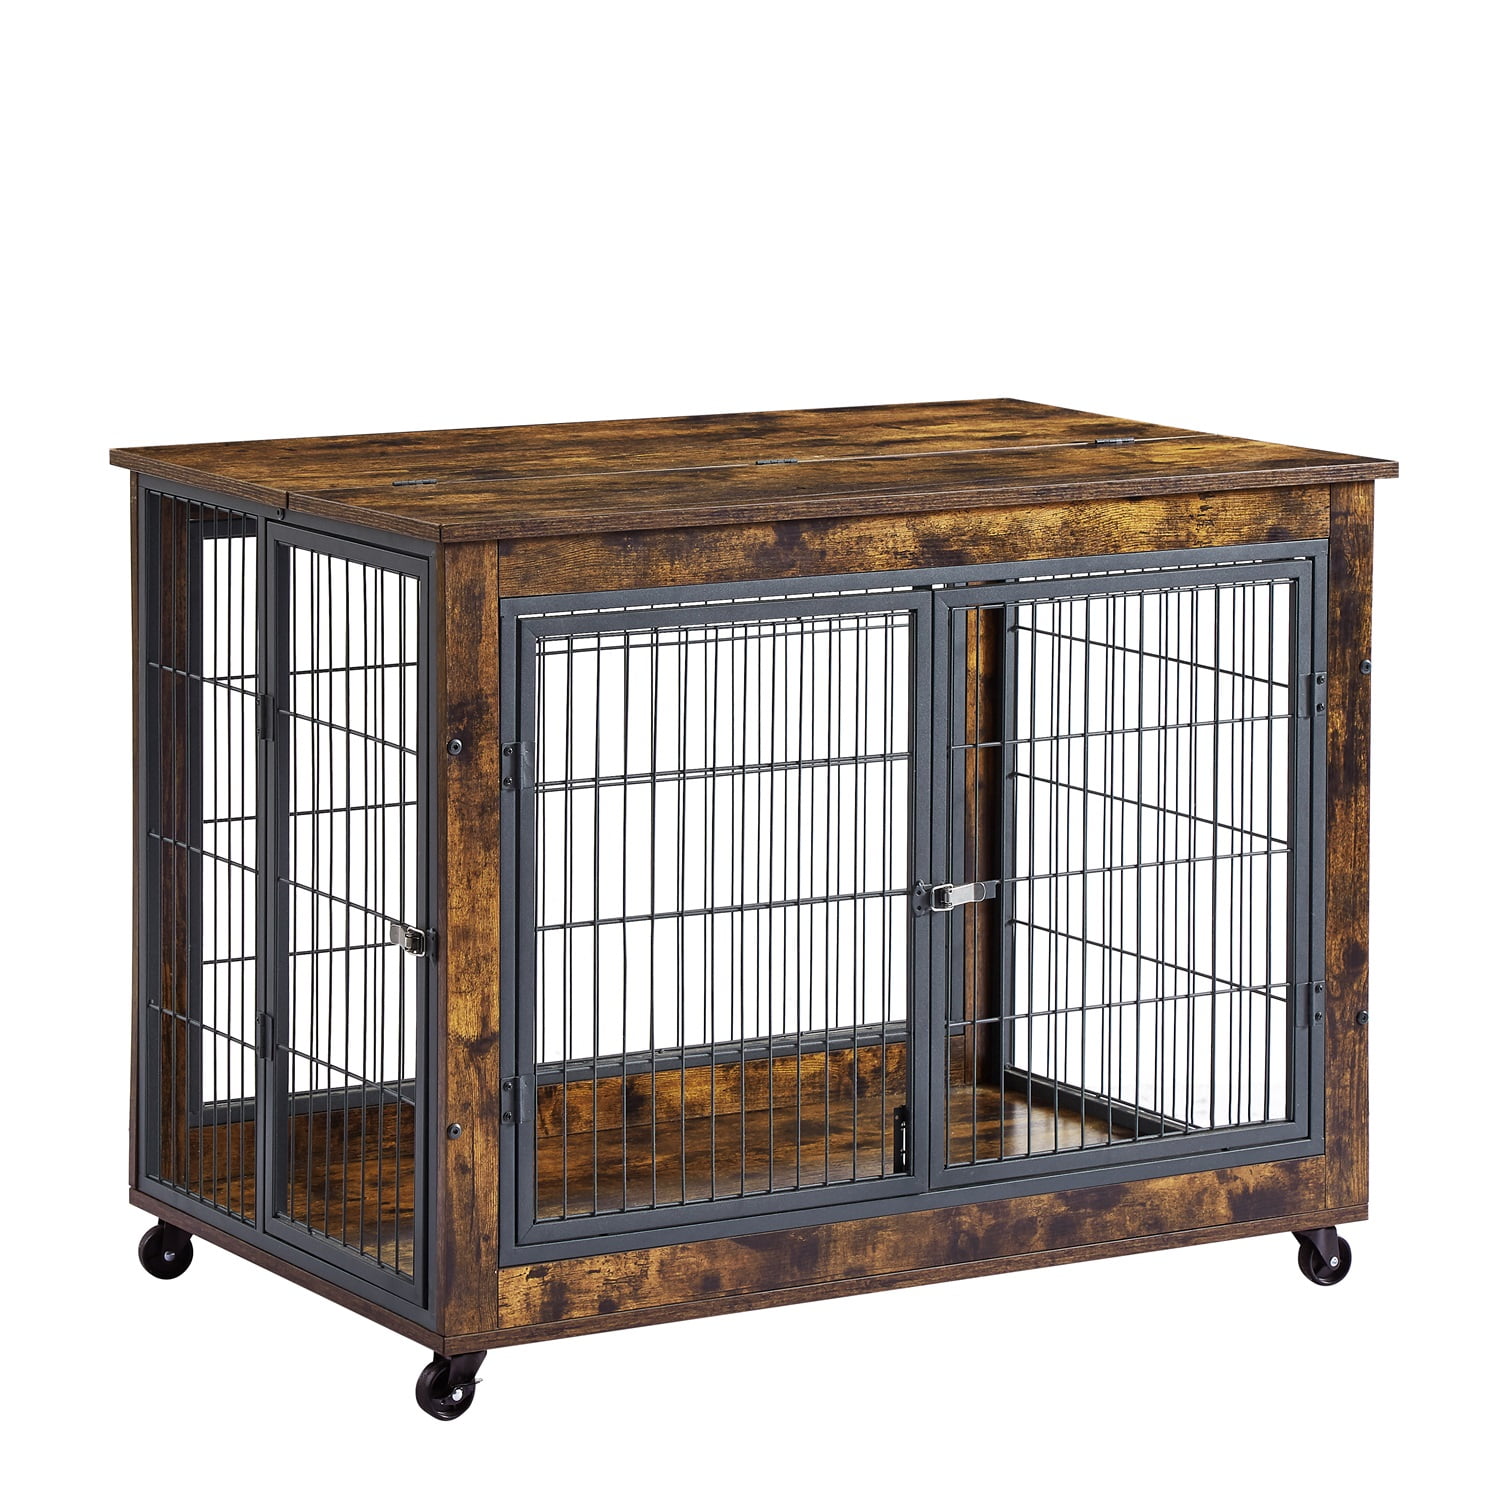 Canddidliike Indoor Outdoor Metal Dog Crate Control Table, 39" Wooden Frame Pet Cage for Medium Dog